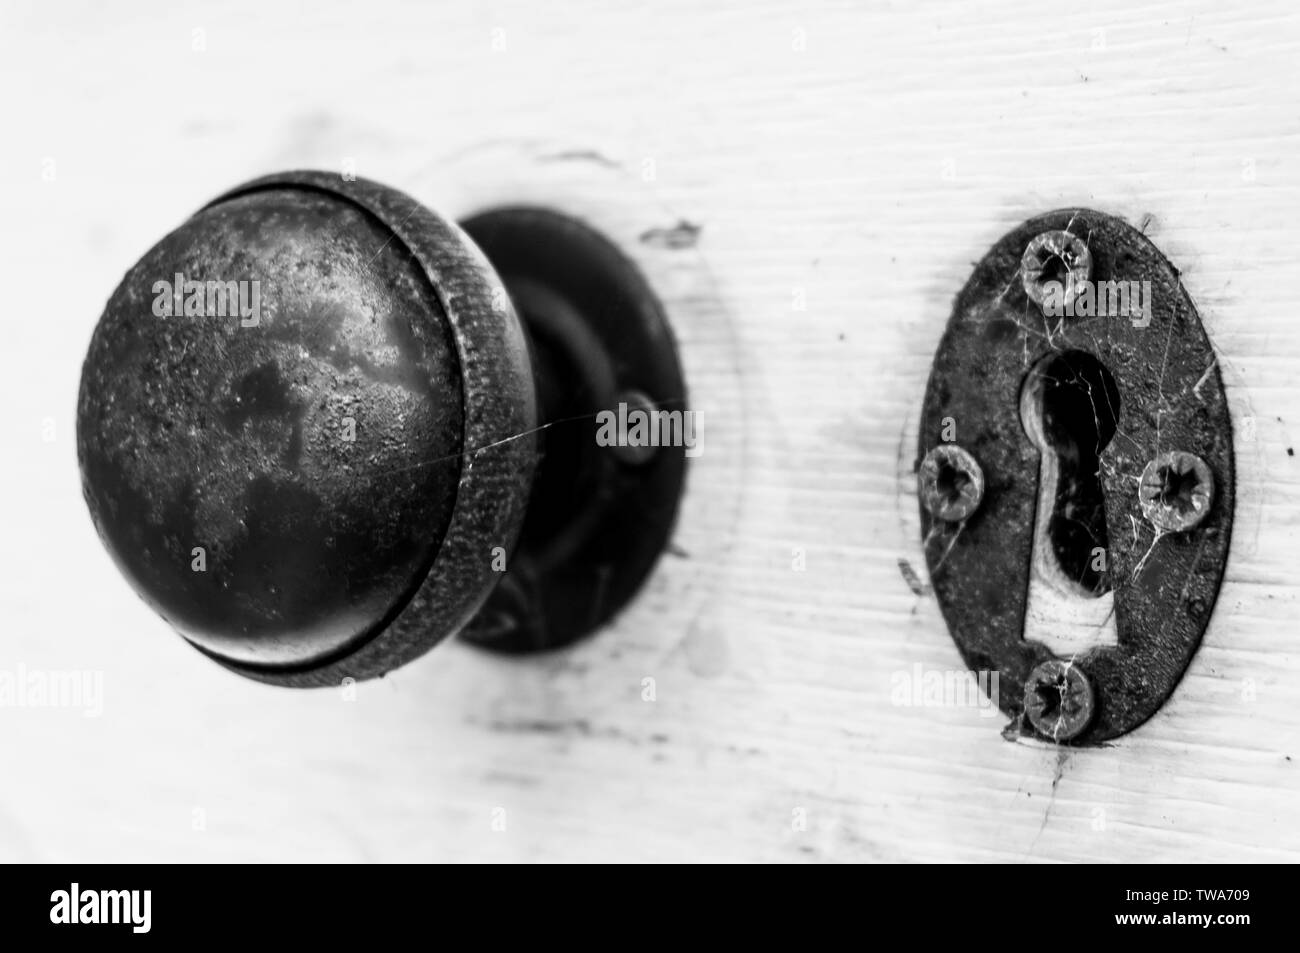 A traditional round door knob and keyhole on a wooden door Stock Photo